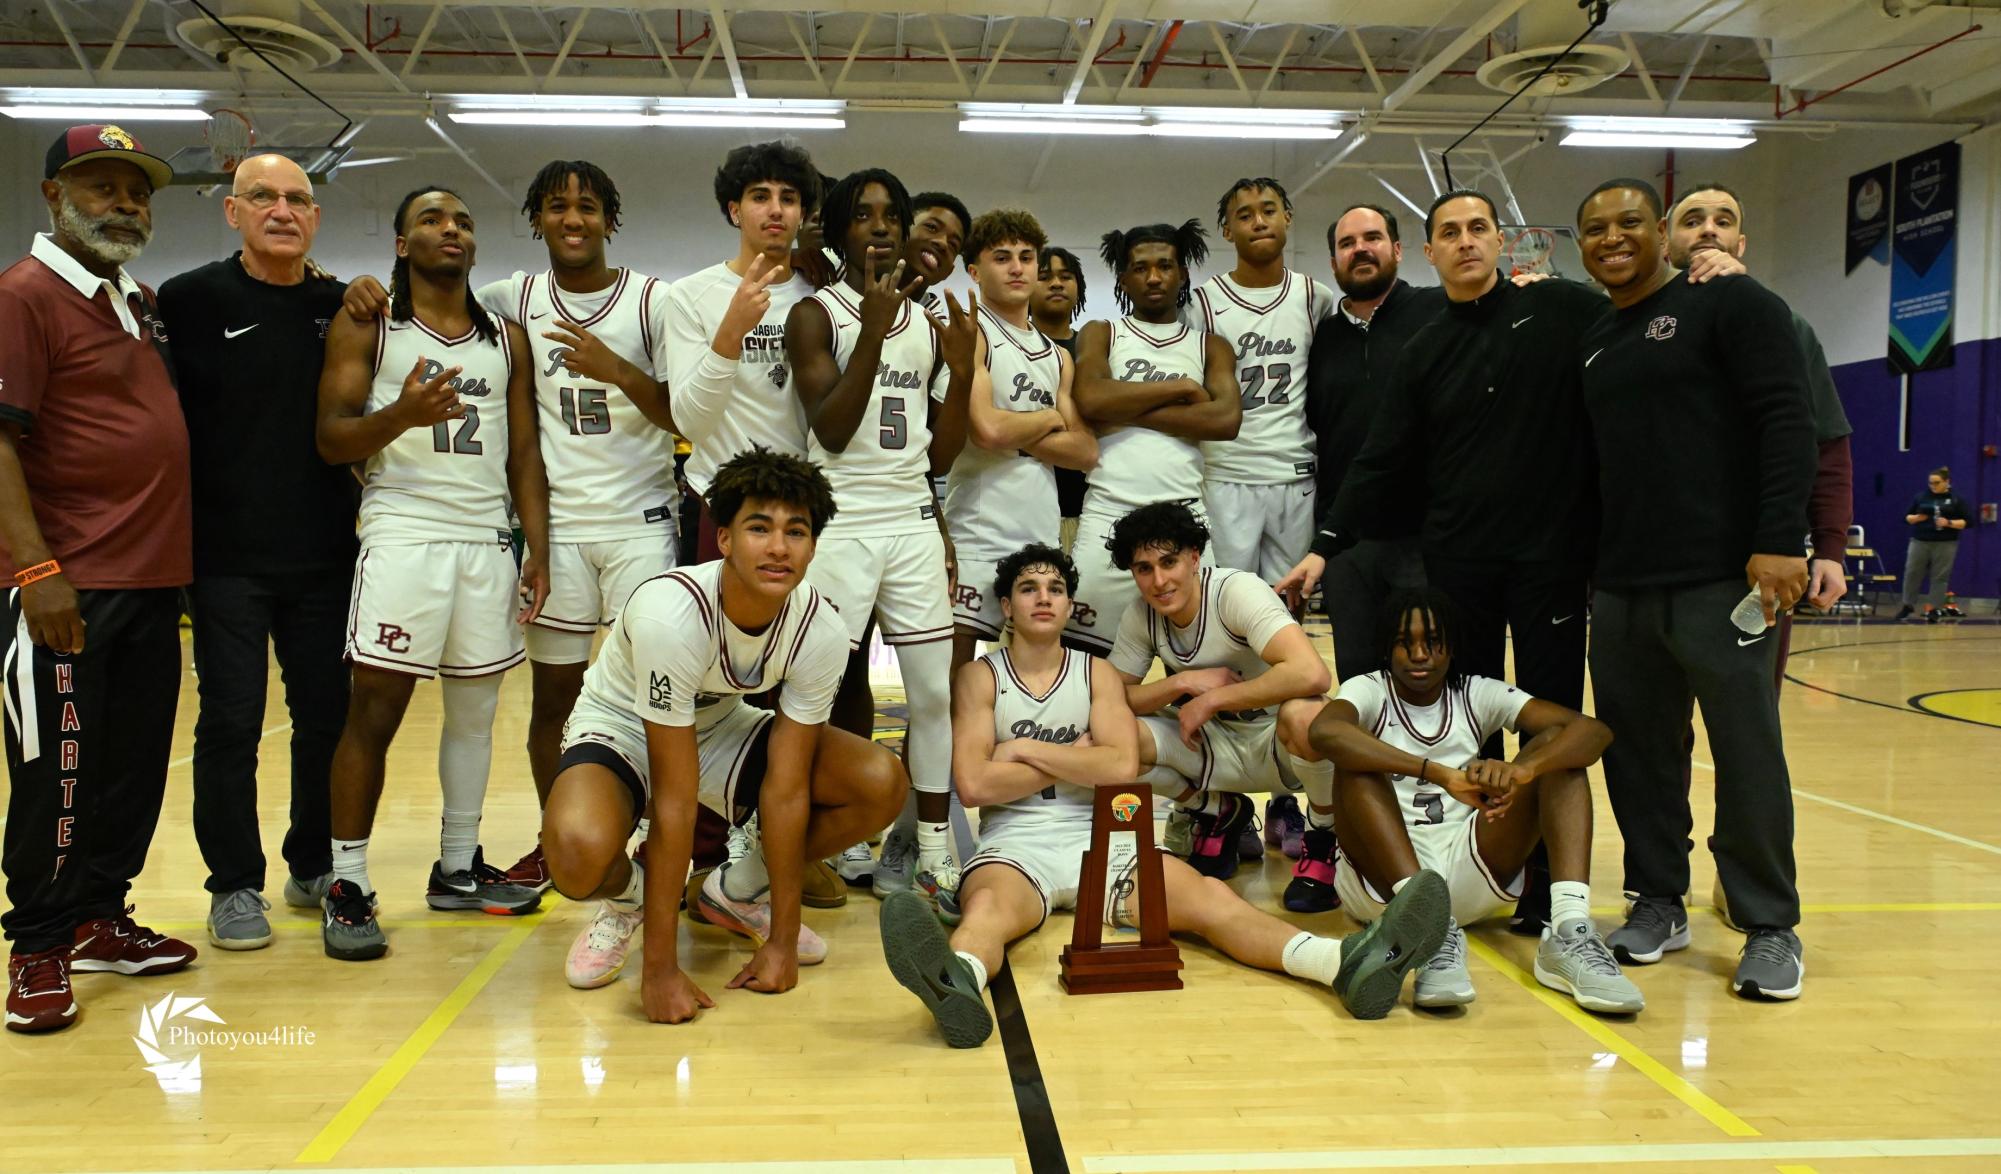 Jaguars Win District Title in Thrilling Basketball Showdown